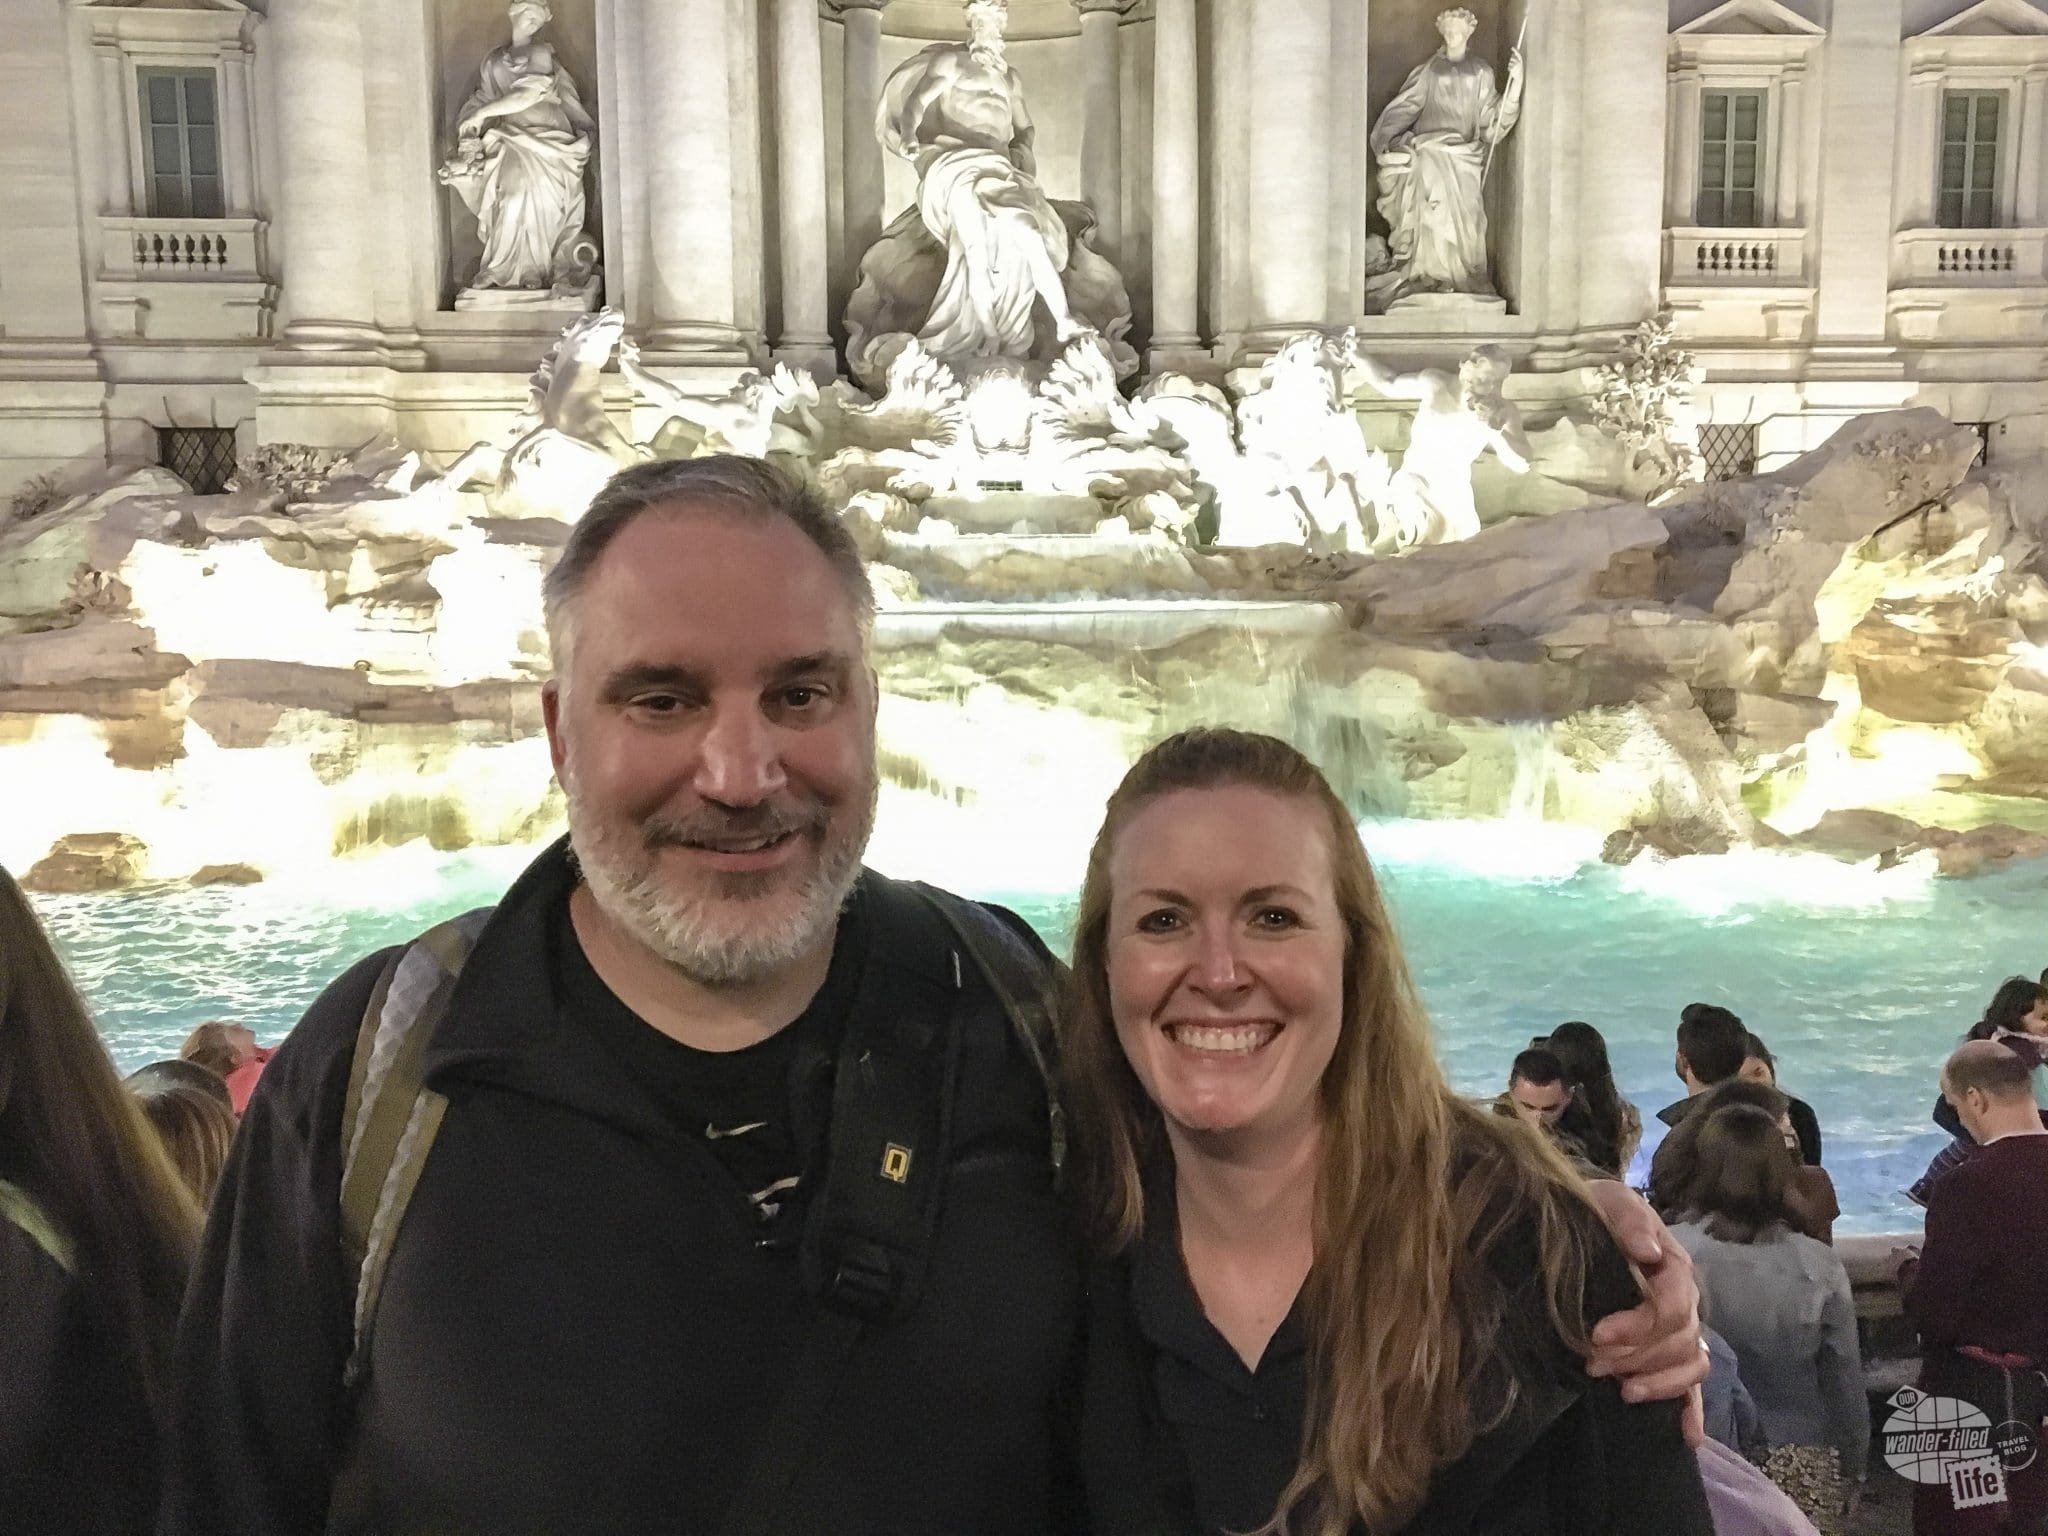 Grant and Bonnie at the Trevi Fountain. We definitely made a point to purchase the optional travel insurance before heading off on our Italian field trip!